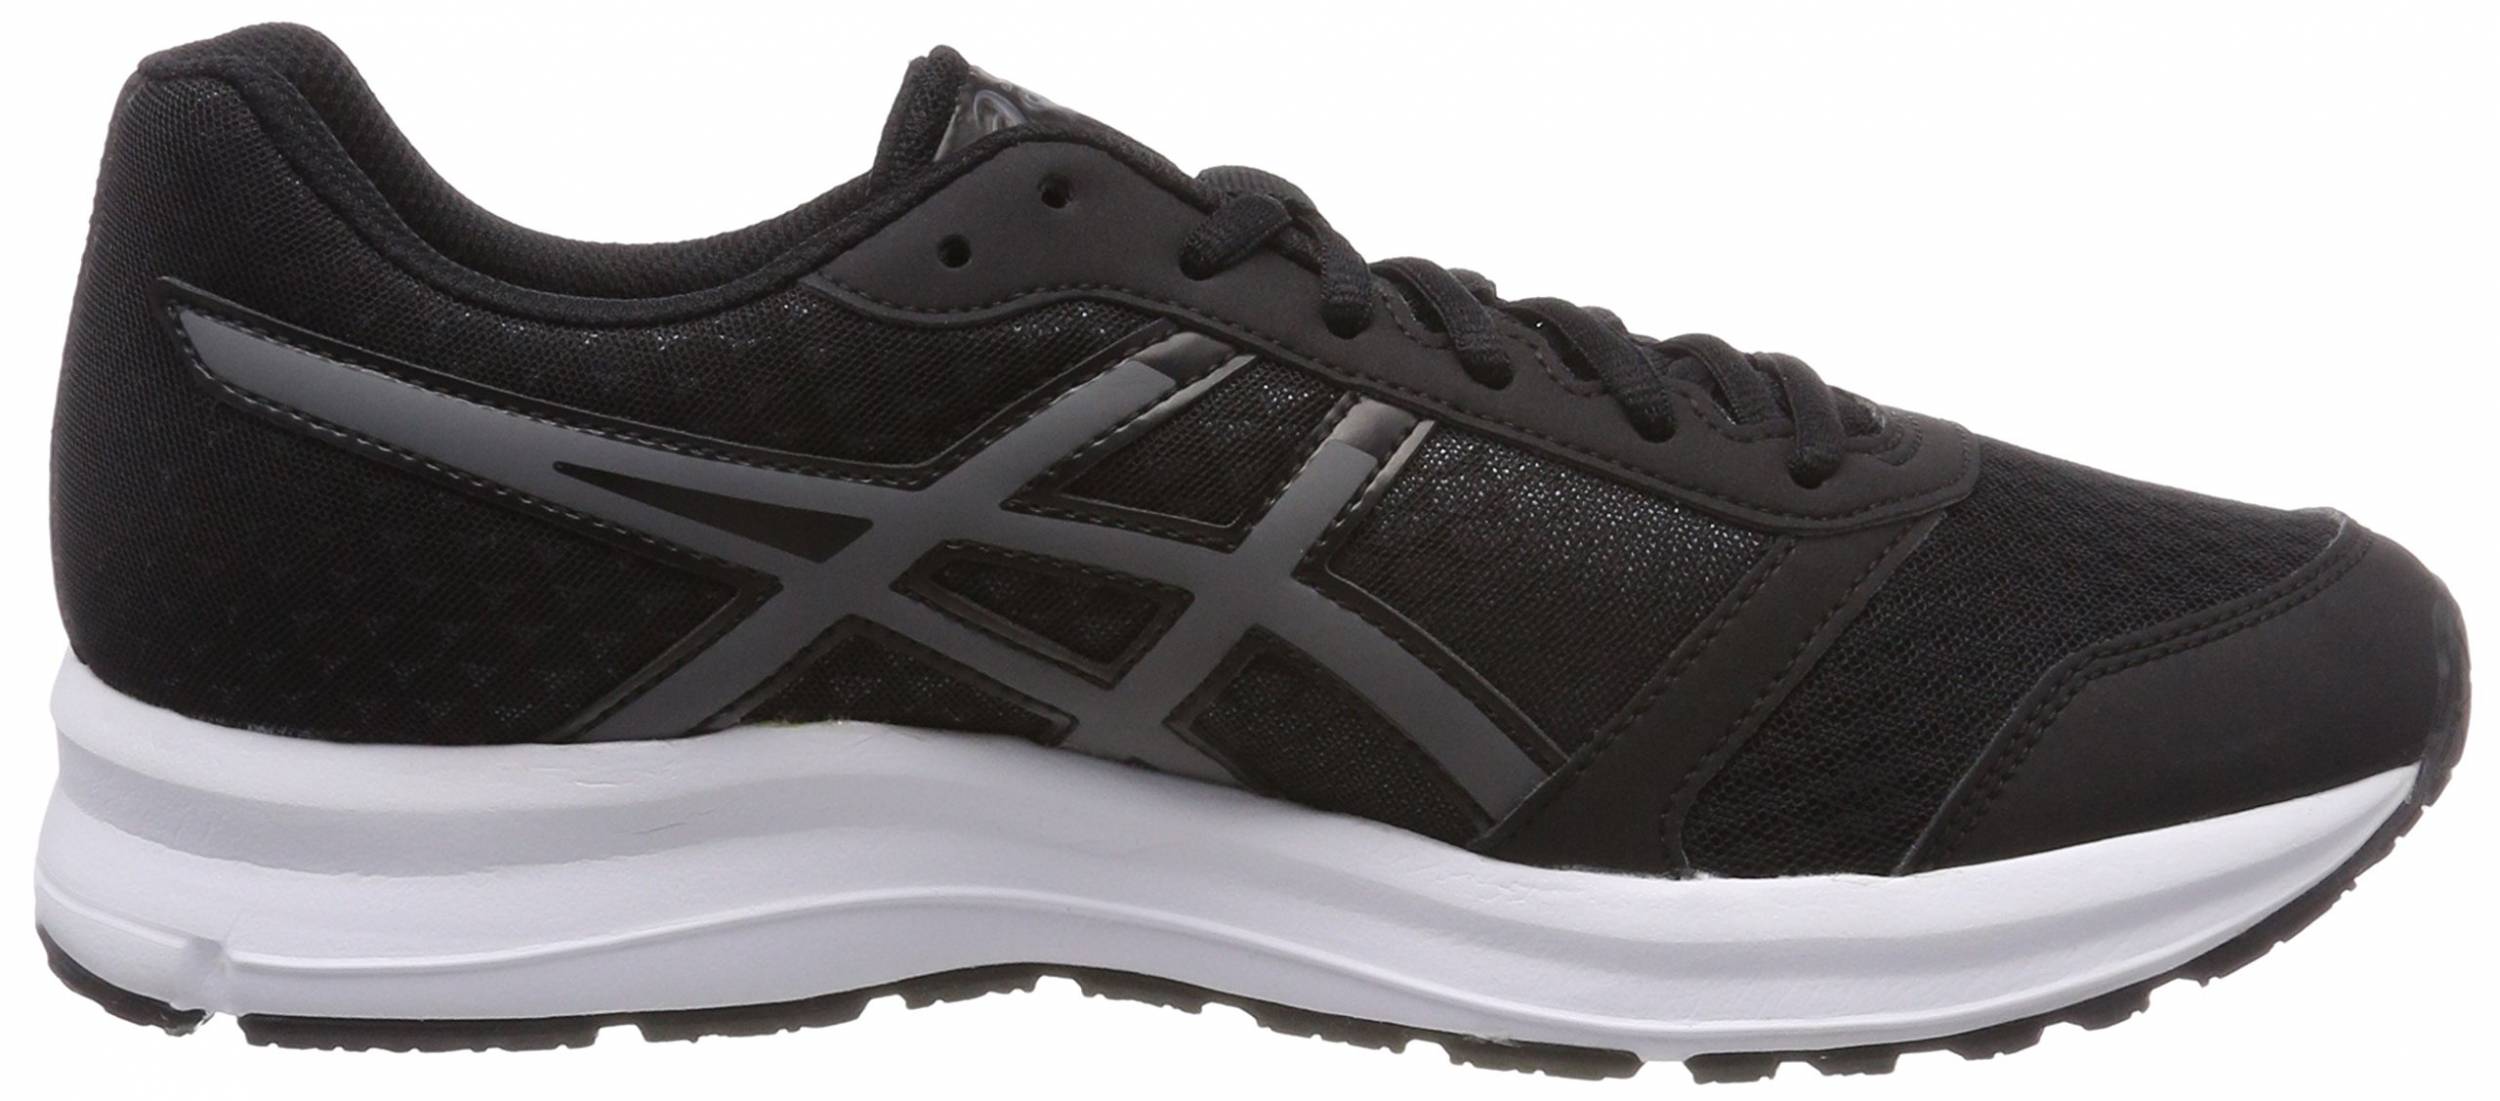 Only $36 + Review of Asics Patriot 8 